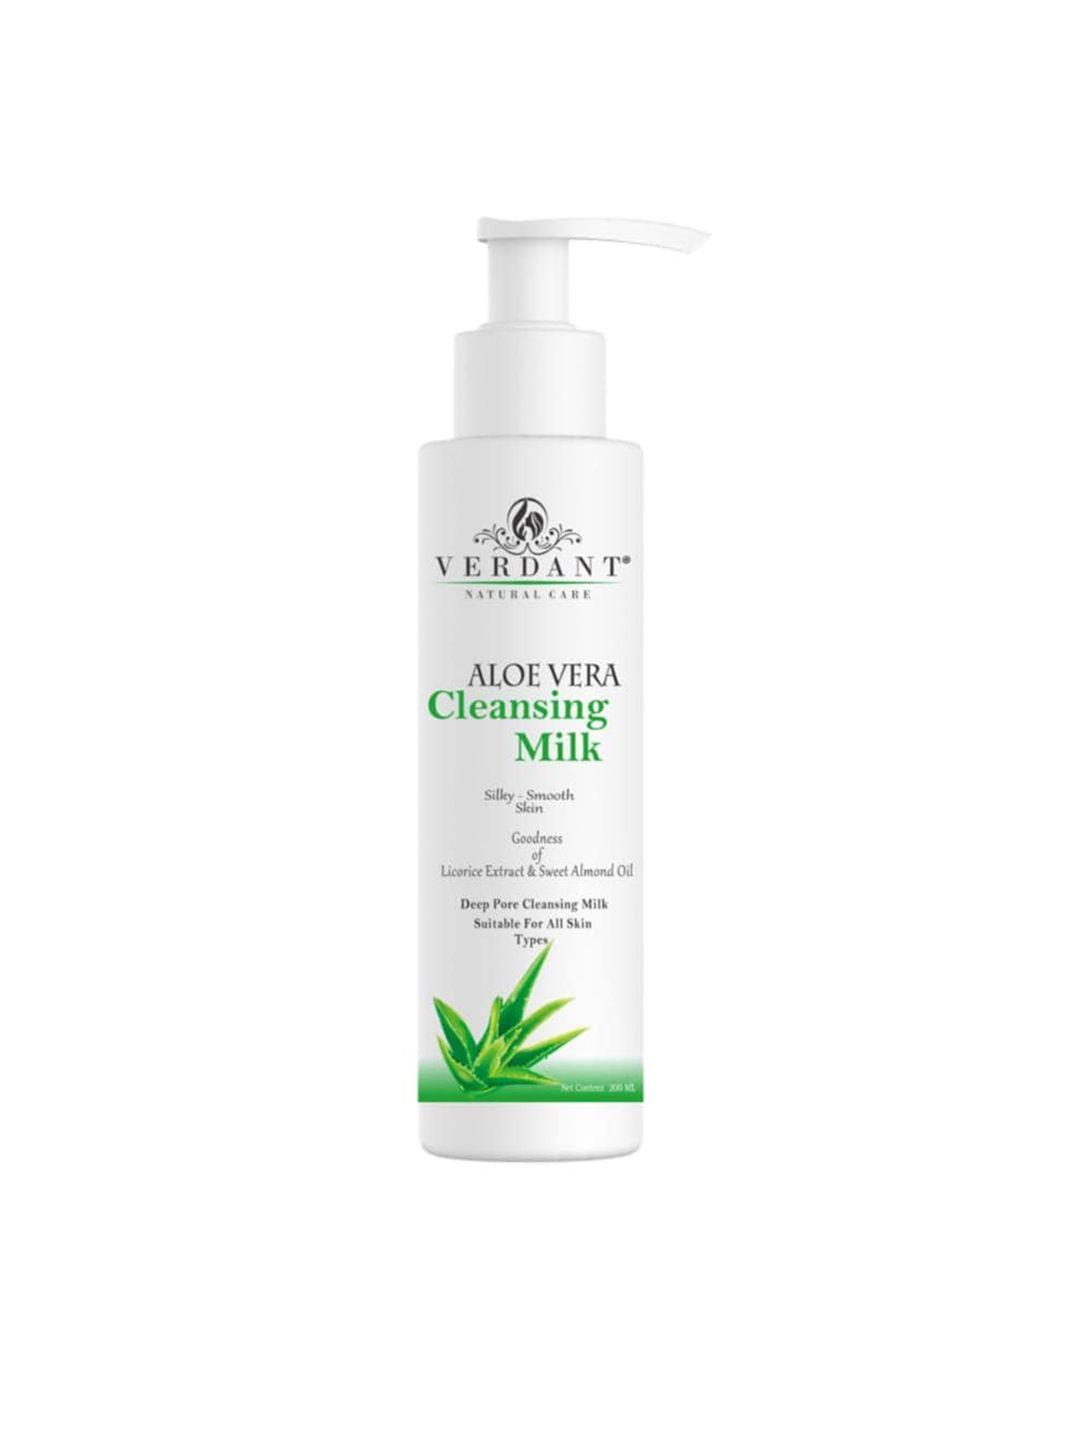 verdant natural care aloe vera cleansing milk with licorice & sweet almond - 200 ml